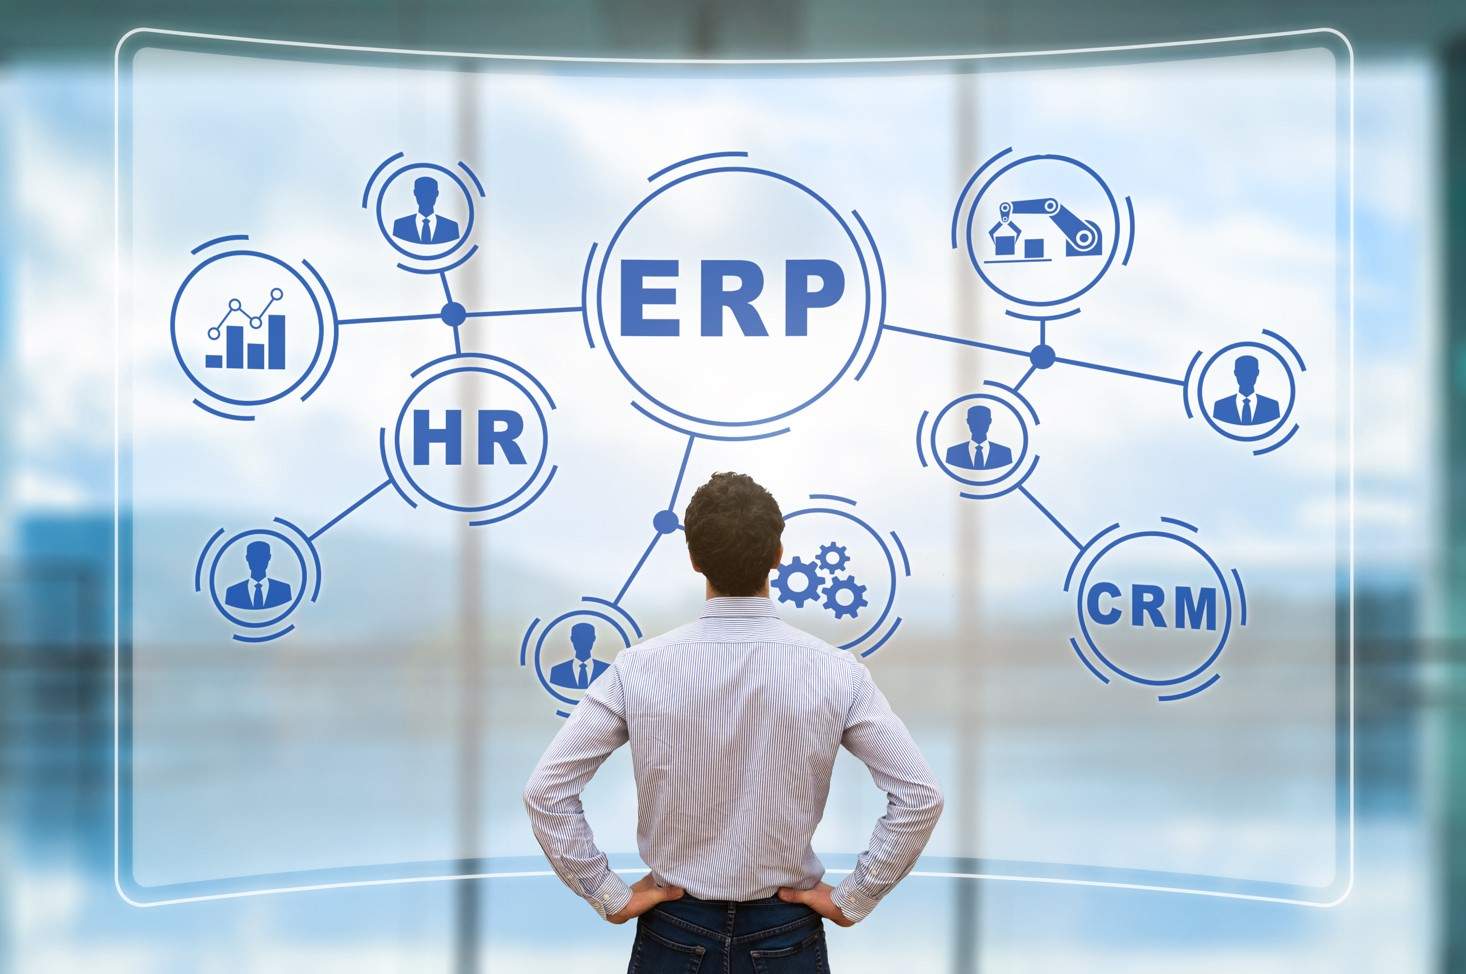 Say goodbye to separate systems and hello to a more efficient and productive business with NetSuite ERP